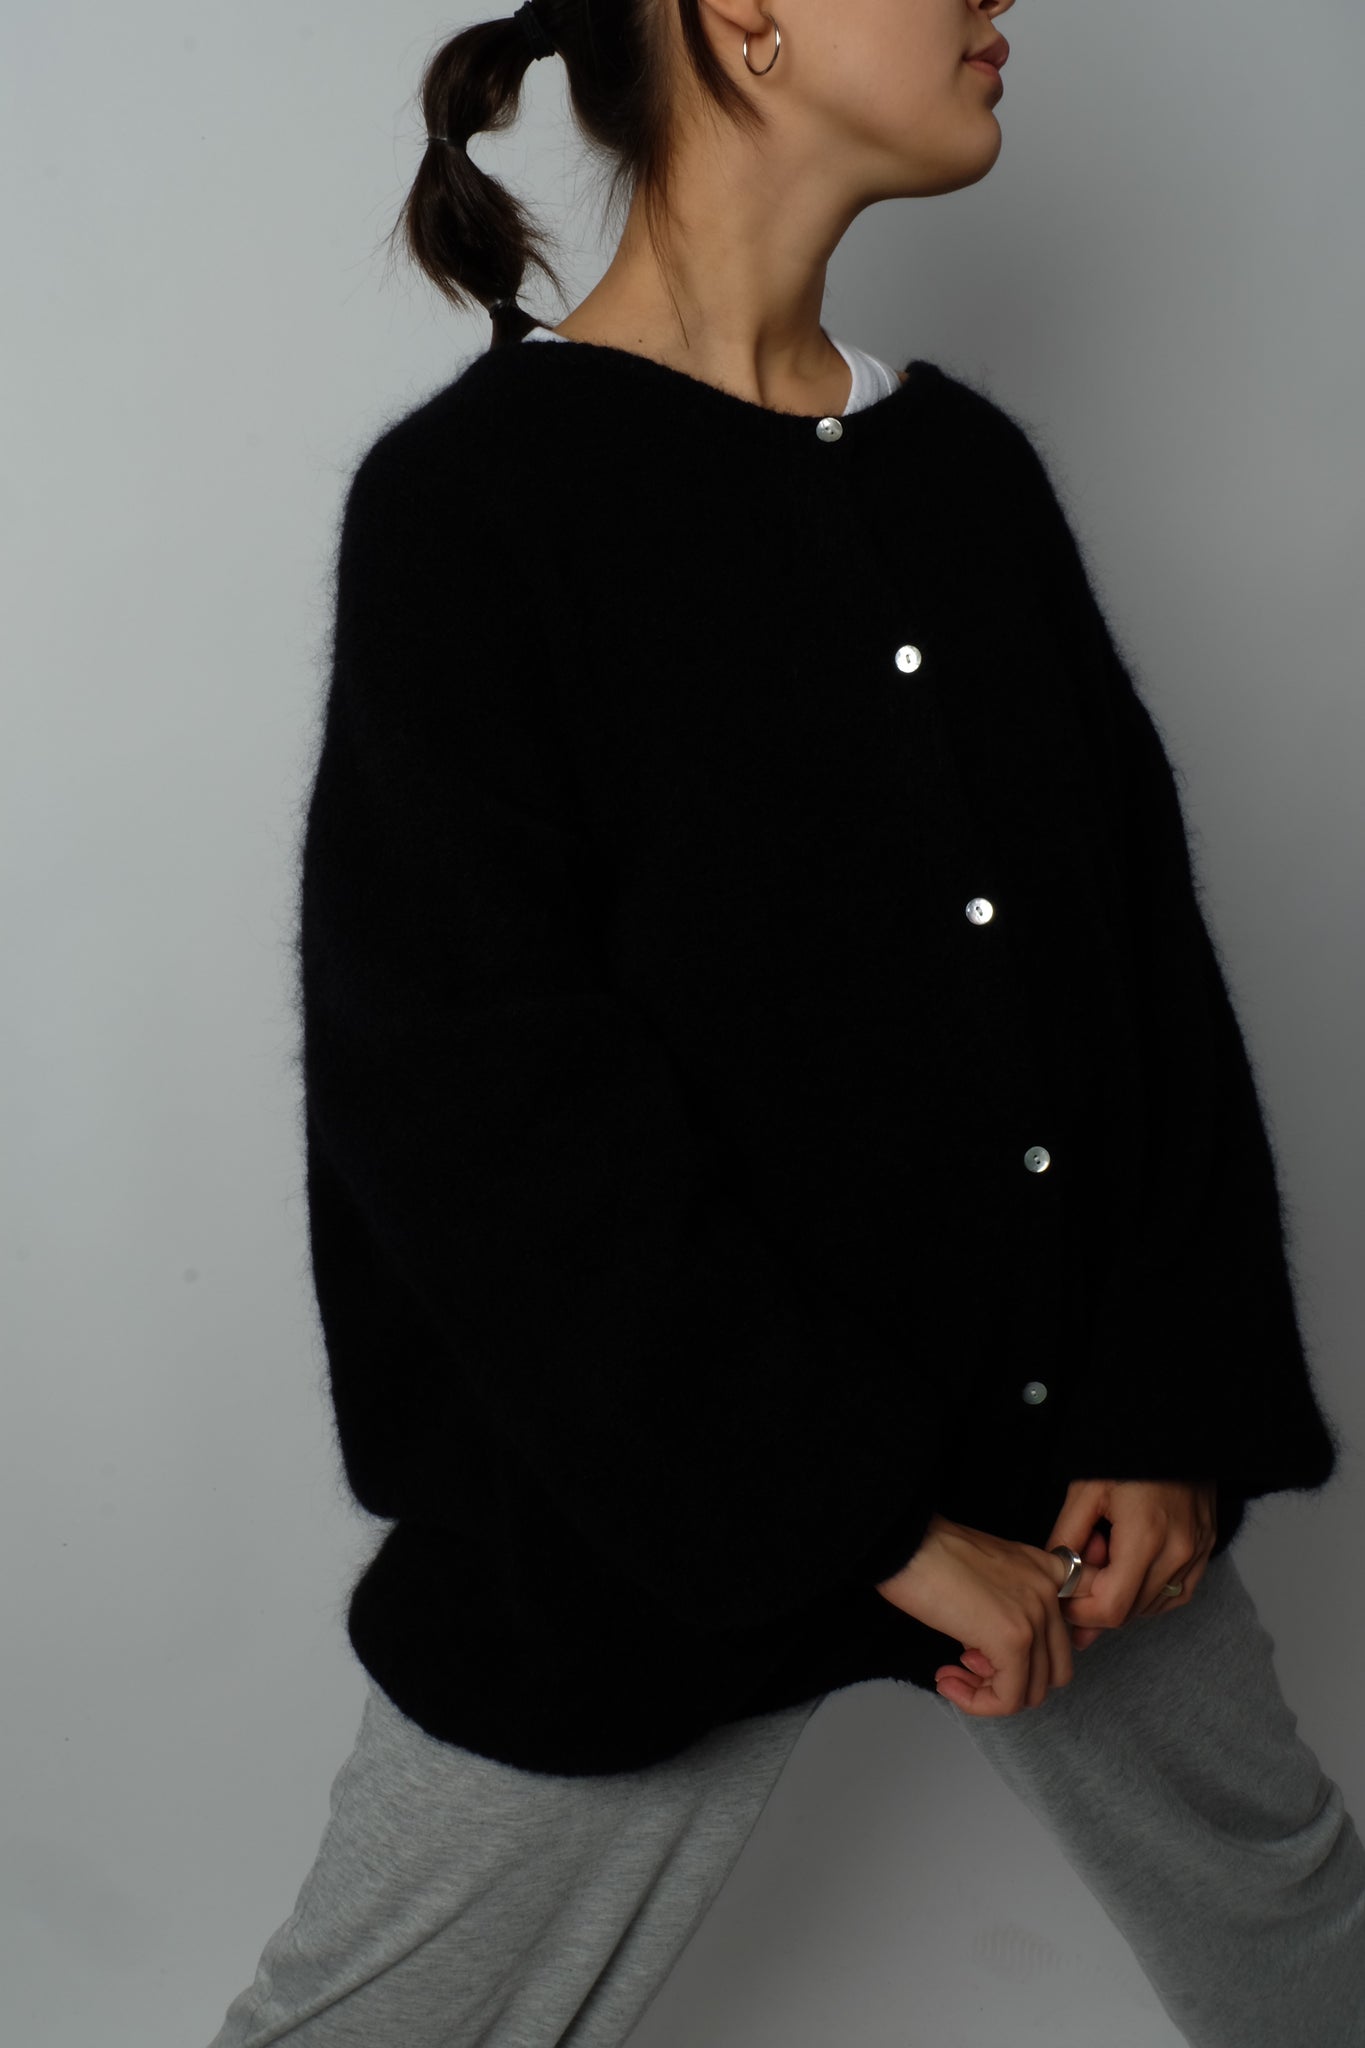 OVERSIZED PEARL BUTTONED CARDIGAN IN NOIR